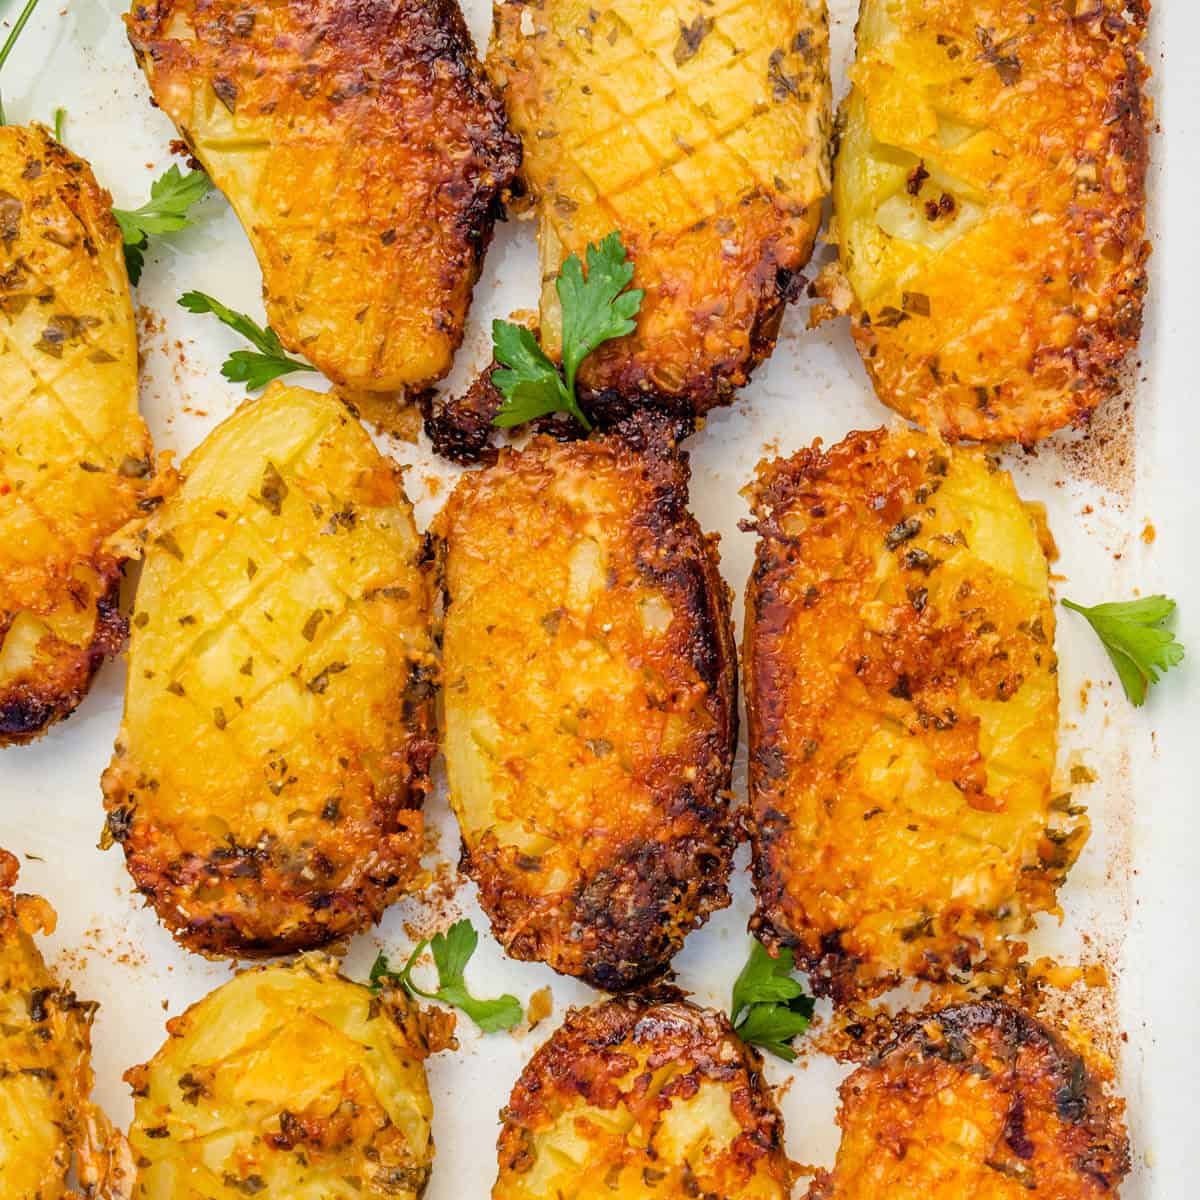 https://cookingwithayeh.com/wp-content/uploads/2022/12/Parmesan-Crusted-Potatoes-SQ-5-1.jpg